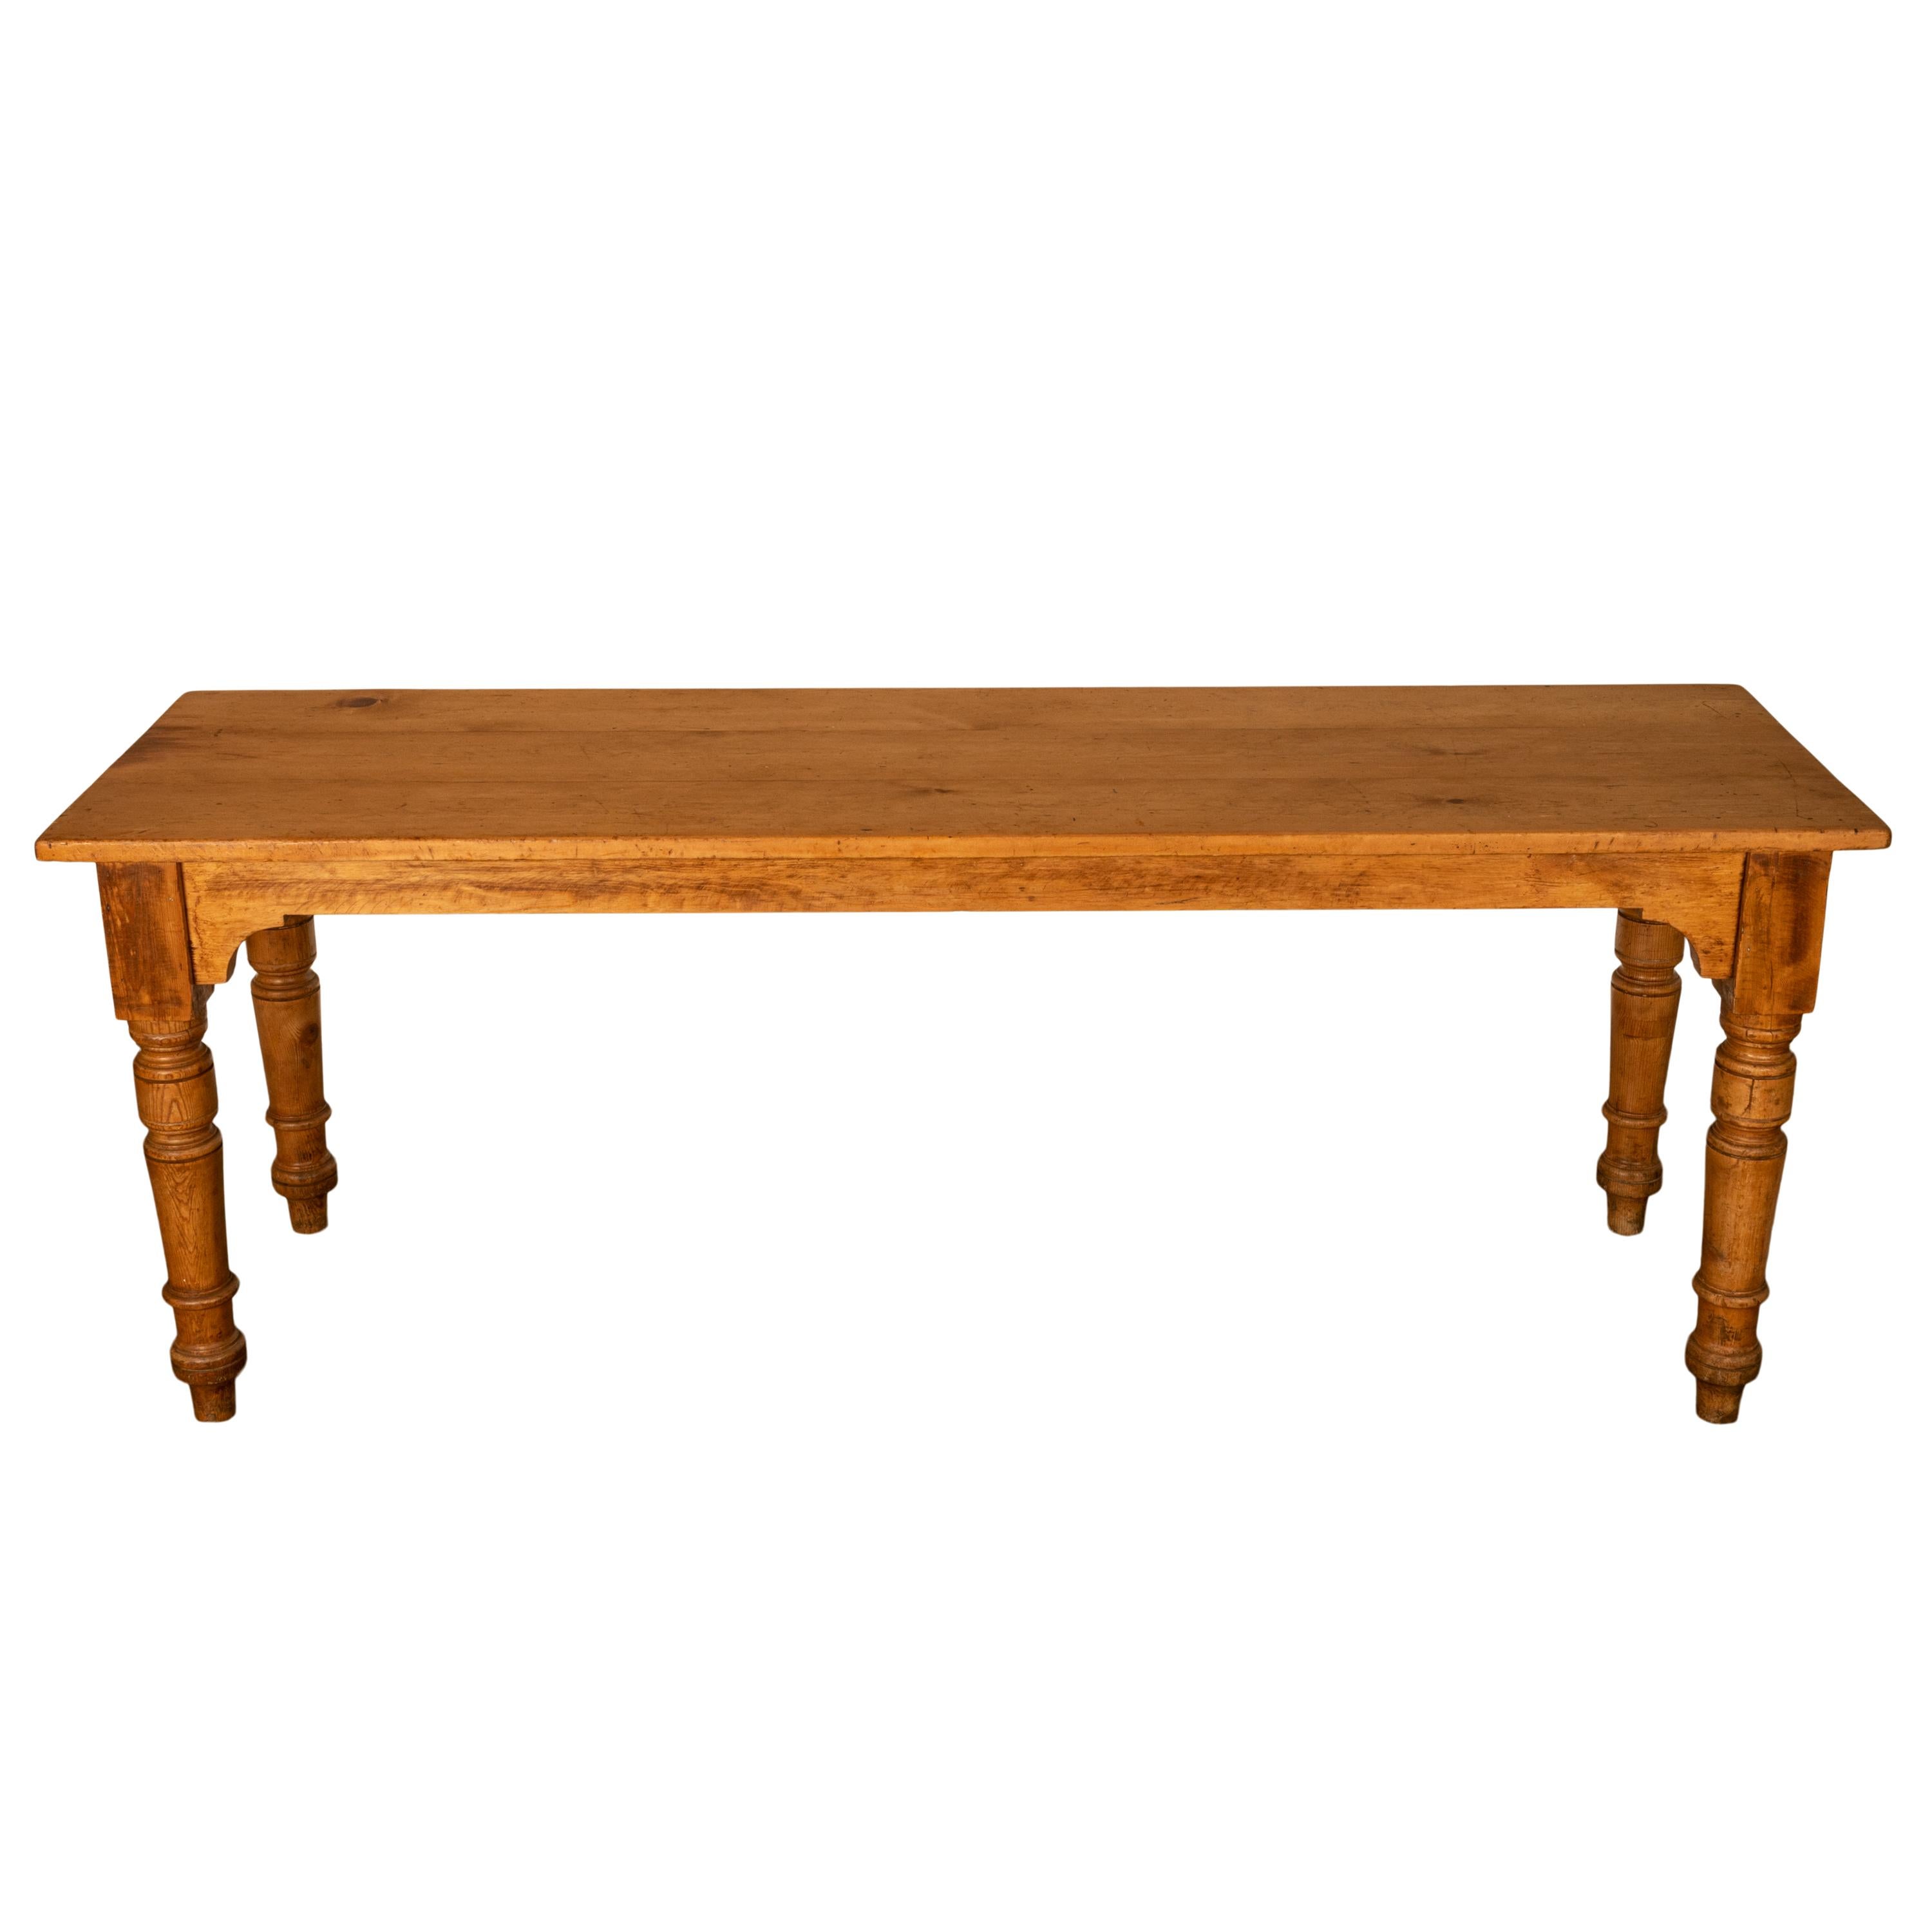 Antique 19th Century English Pine Country Farmhouse 8 seat Dining Table 1860 For Sale 7